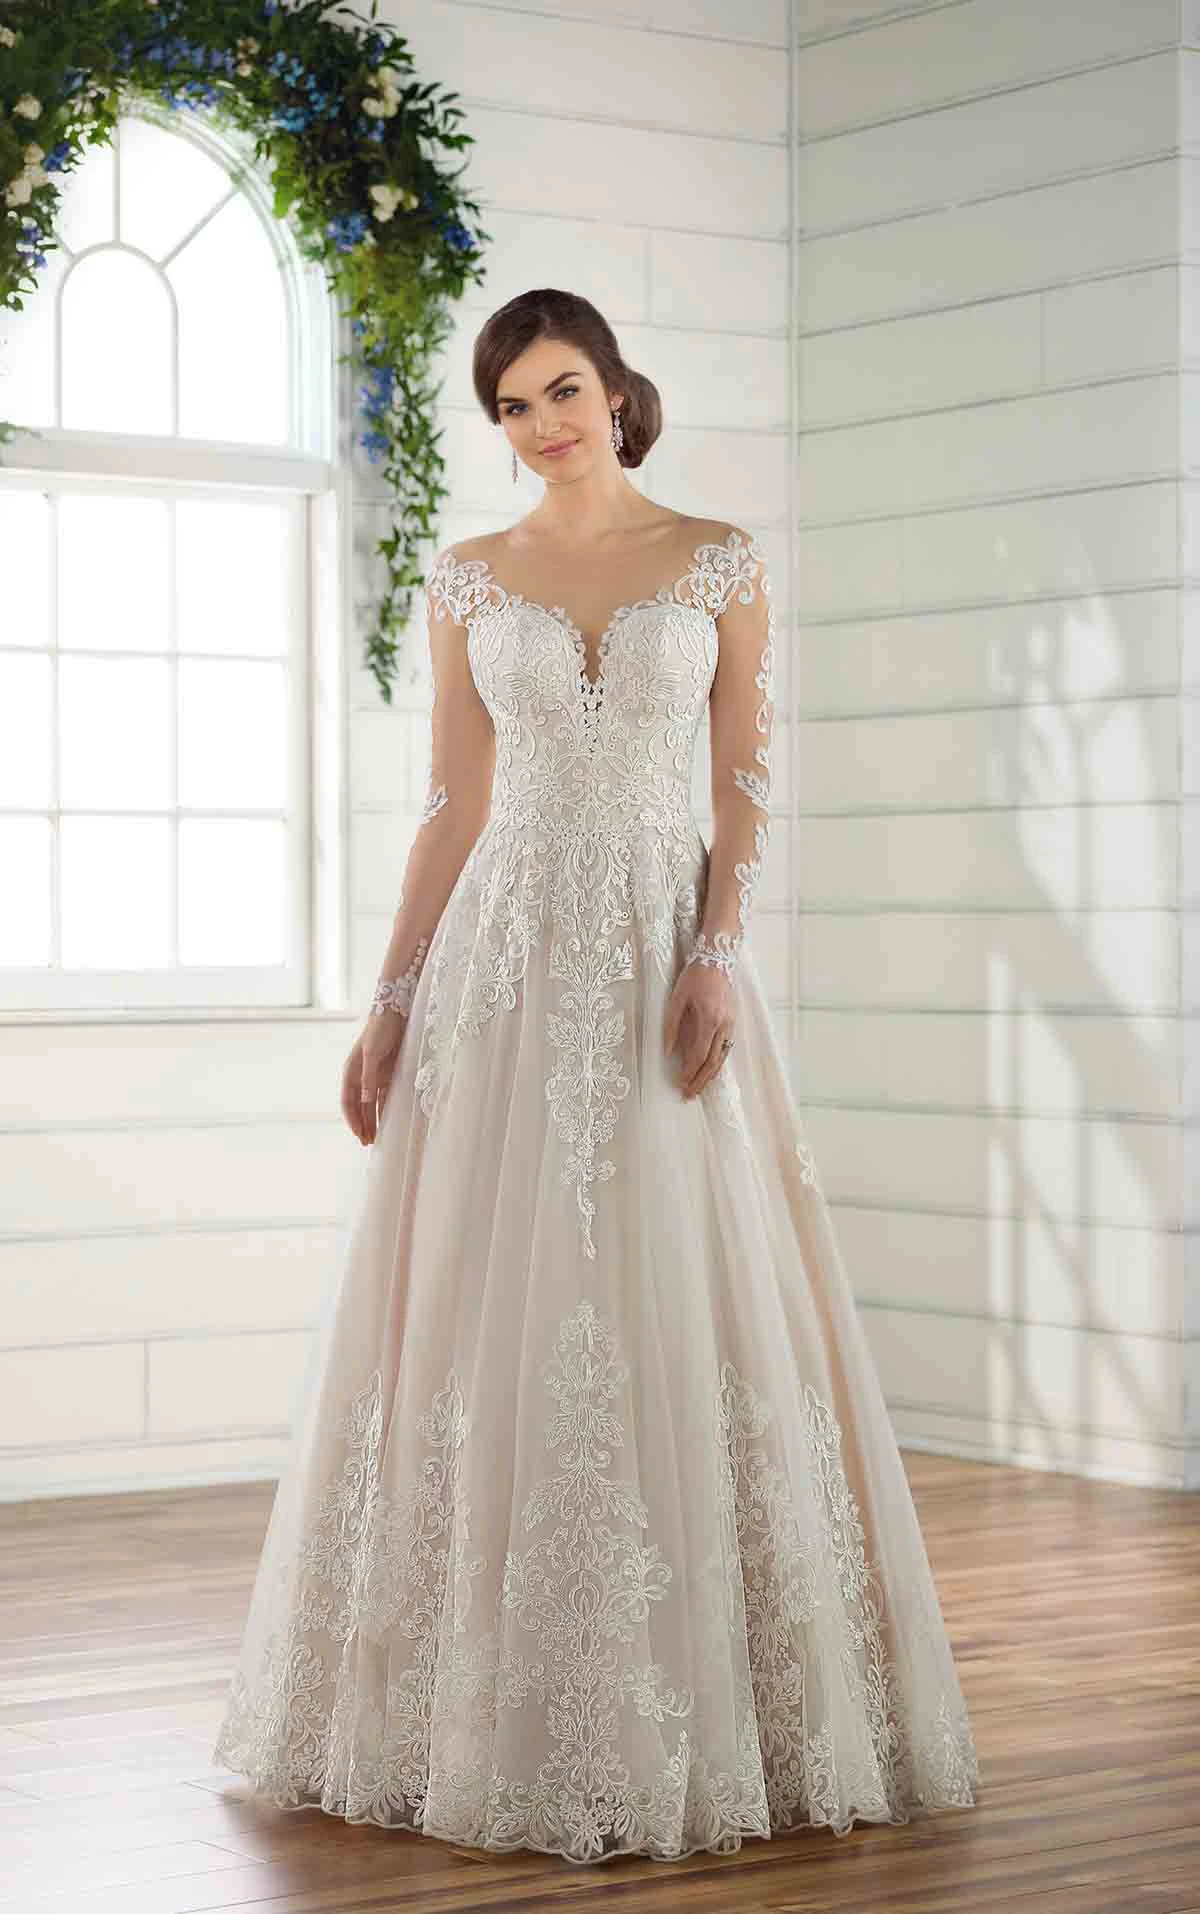 Plus Size Wedding Dress with Lace Sleeves Essense of